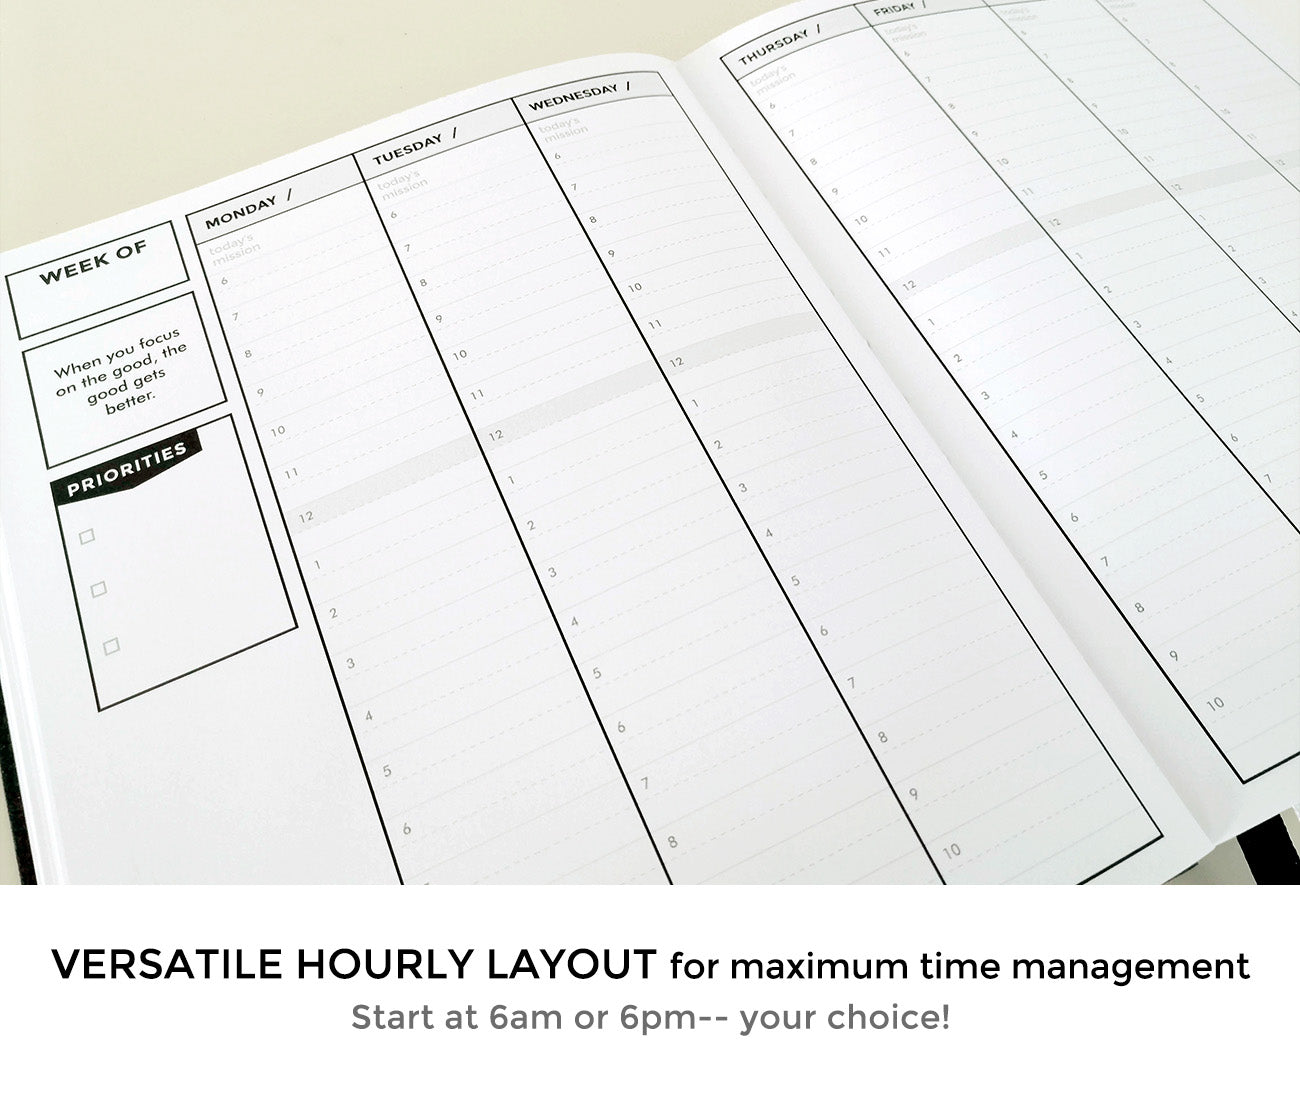 Versatile Hourly Layout-- Start at 6am or 6pm